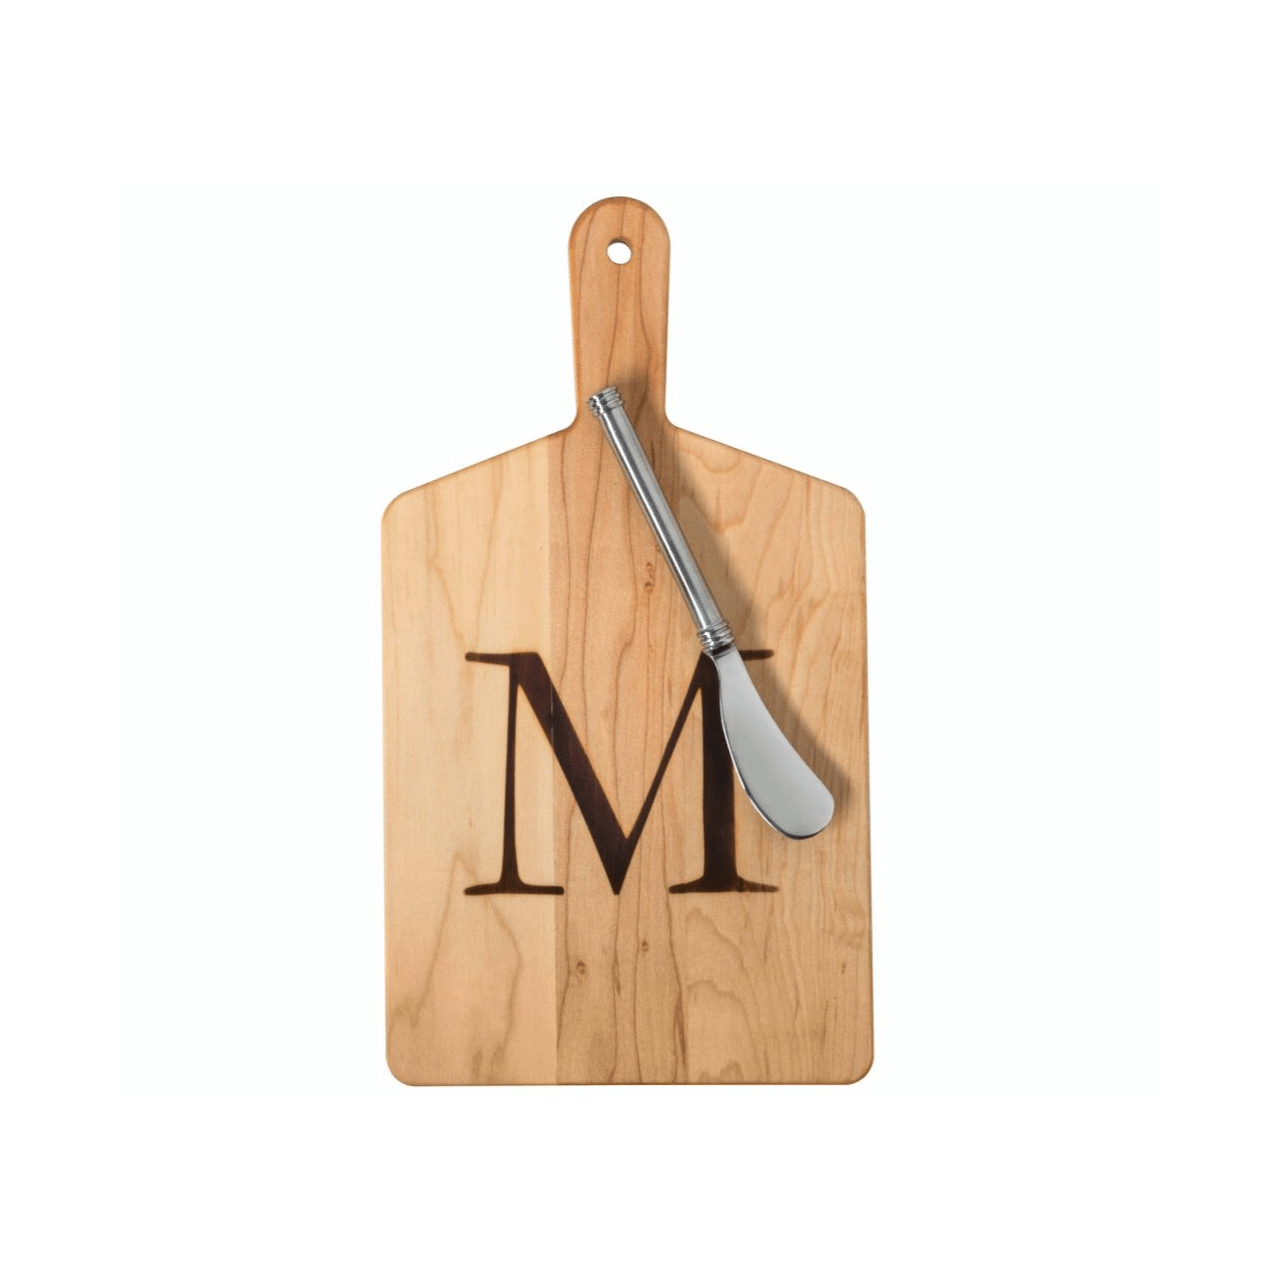 Maple Cheese Board with a Stamped Y and Metal Spreader